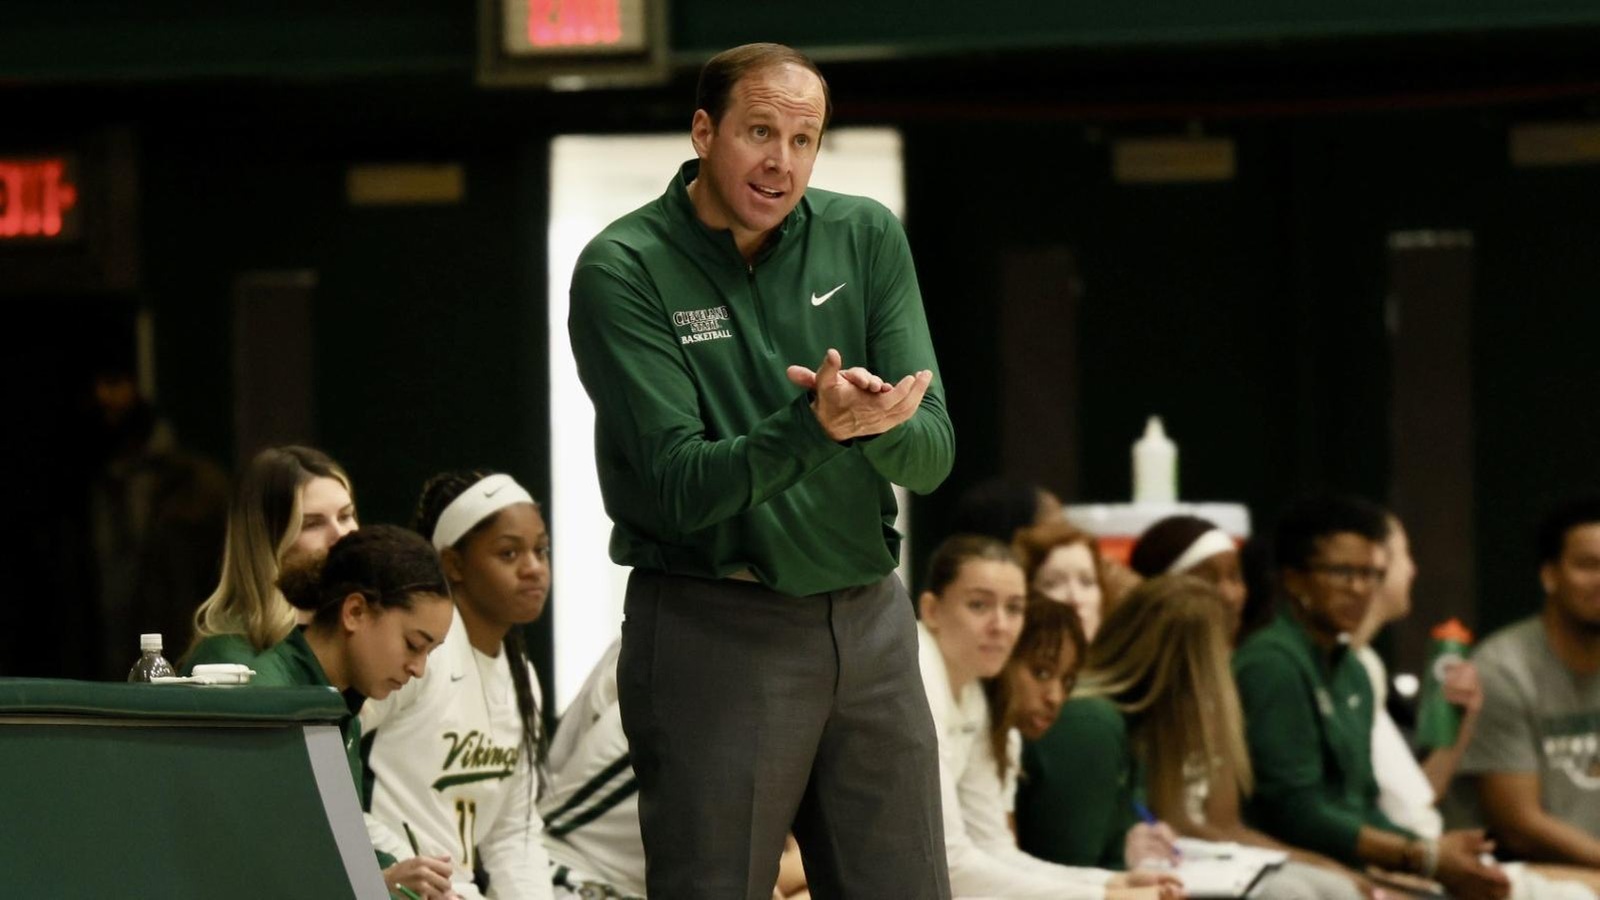 Kielsmeier Notches 100th Win At Cleveland State With 95-41 Victory Over Chicago State